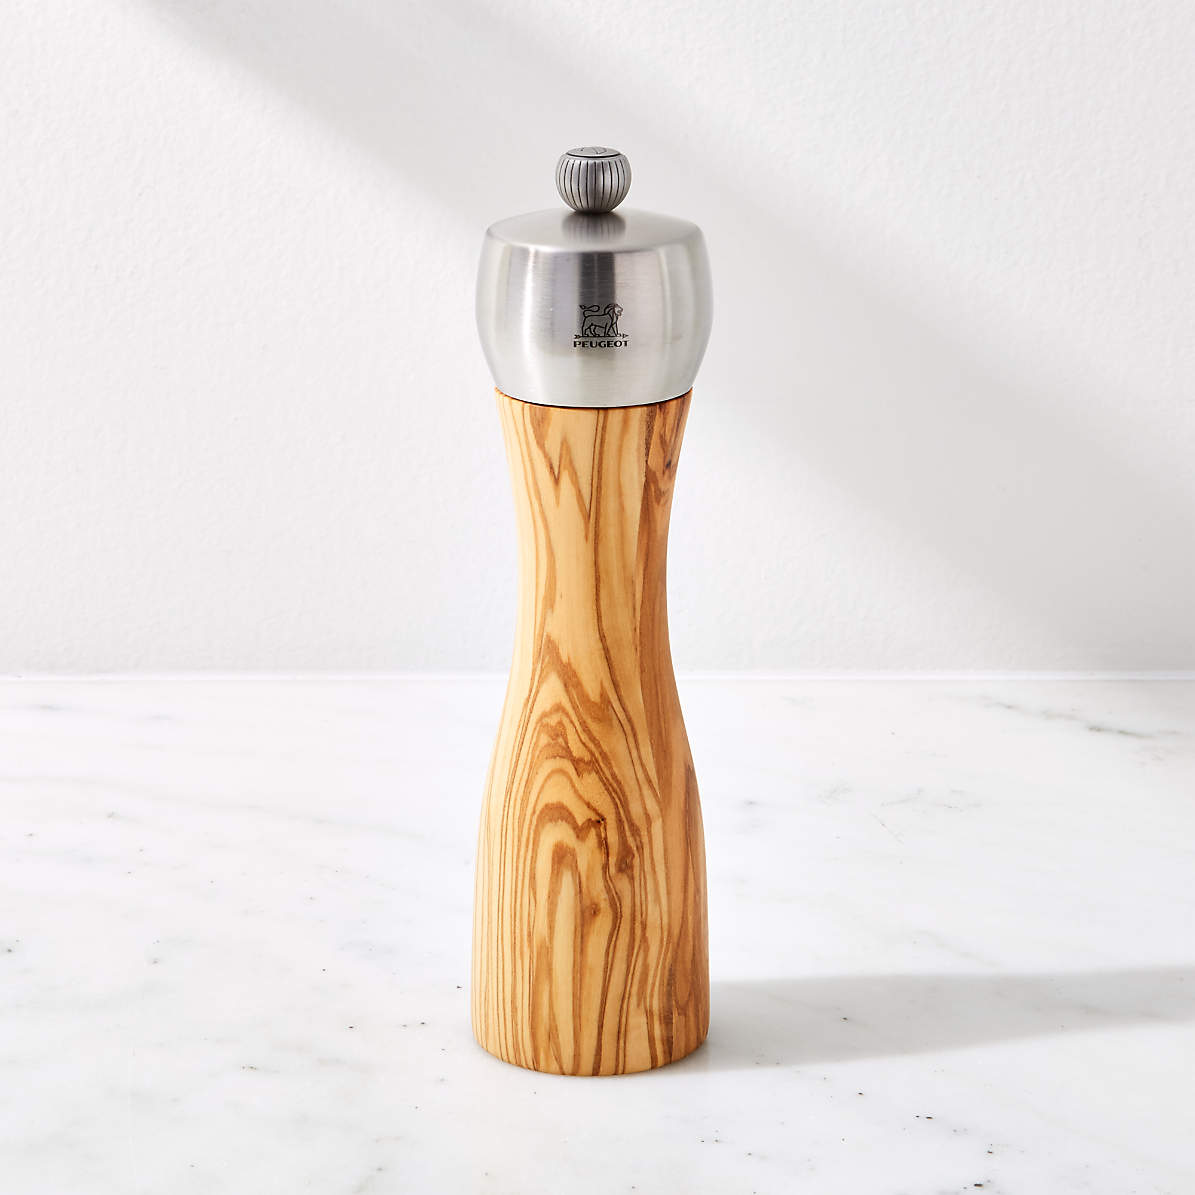 8 Inches Pepper Mill Solid Wood Pepper Grinder with Adjustable Grinder